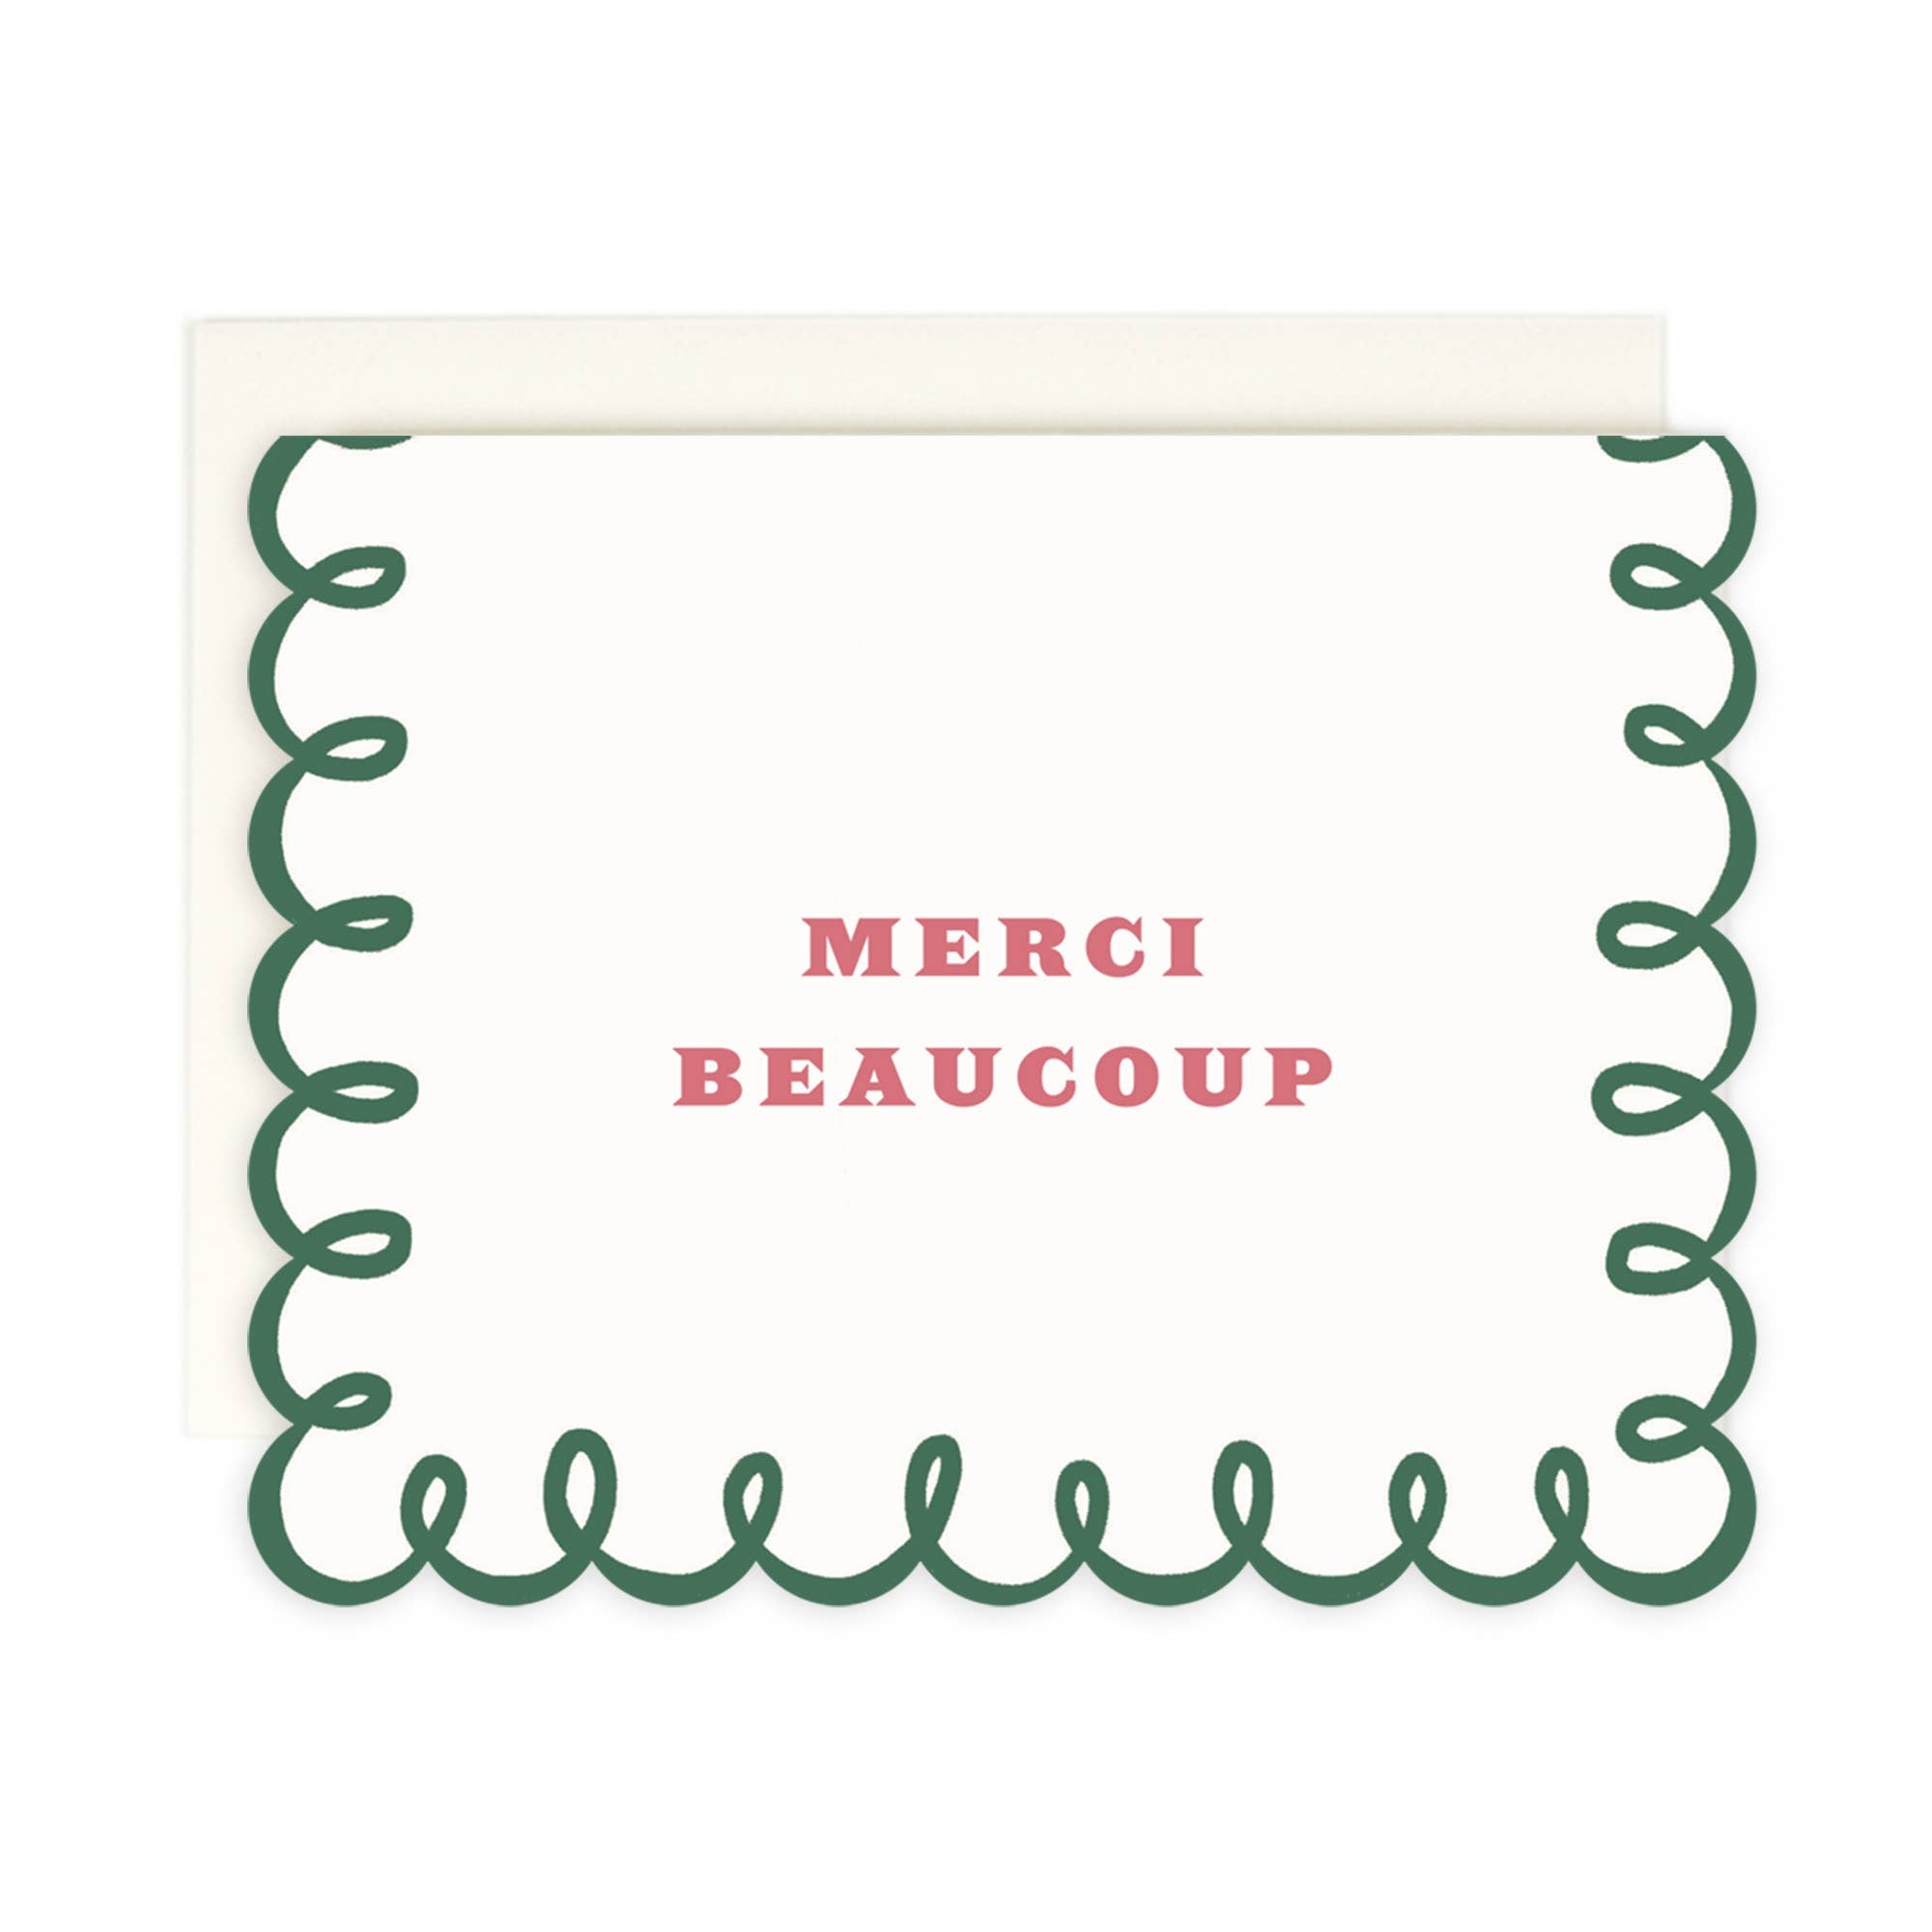 Merci Beaucoup! Greeting Card, Single Blank Card or Boxed Set